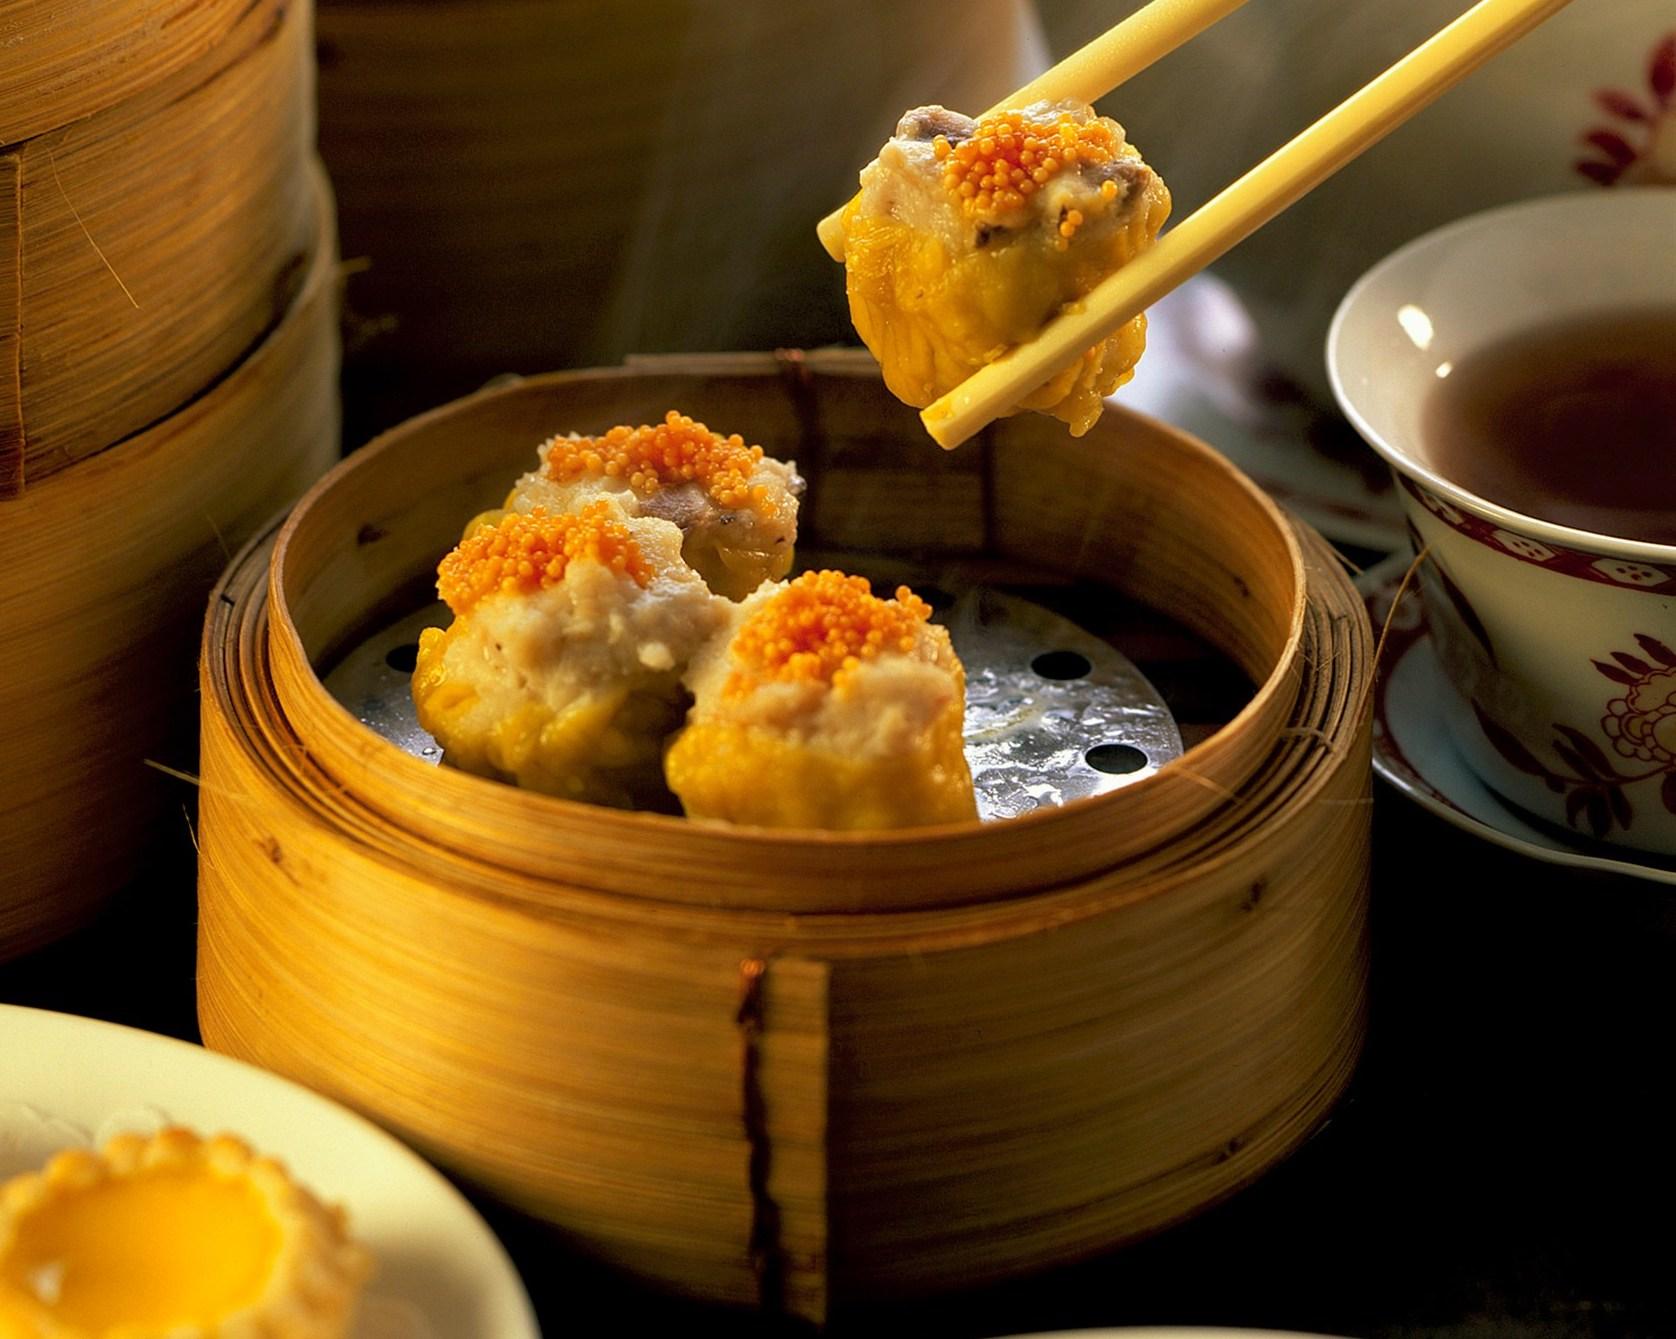 Dig in to dim sum